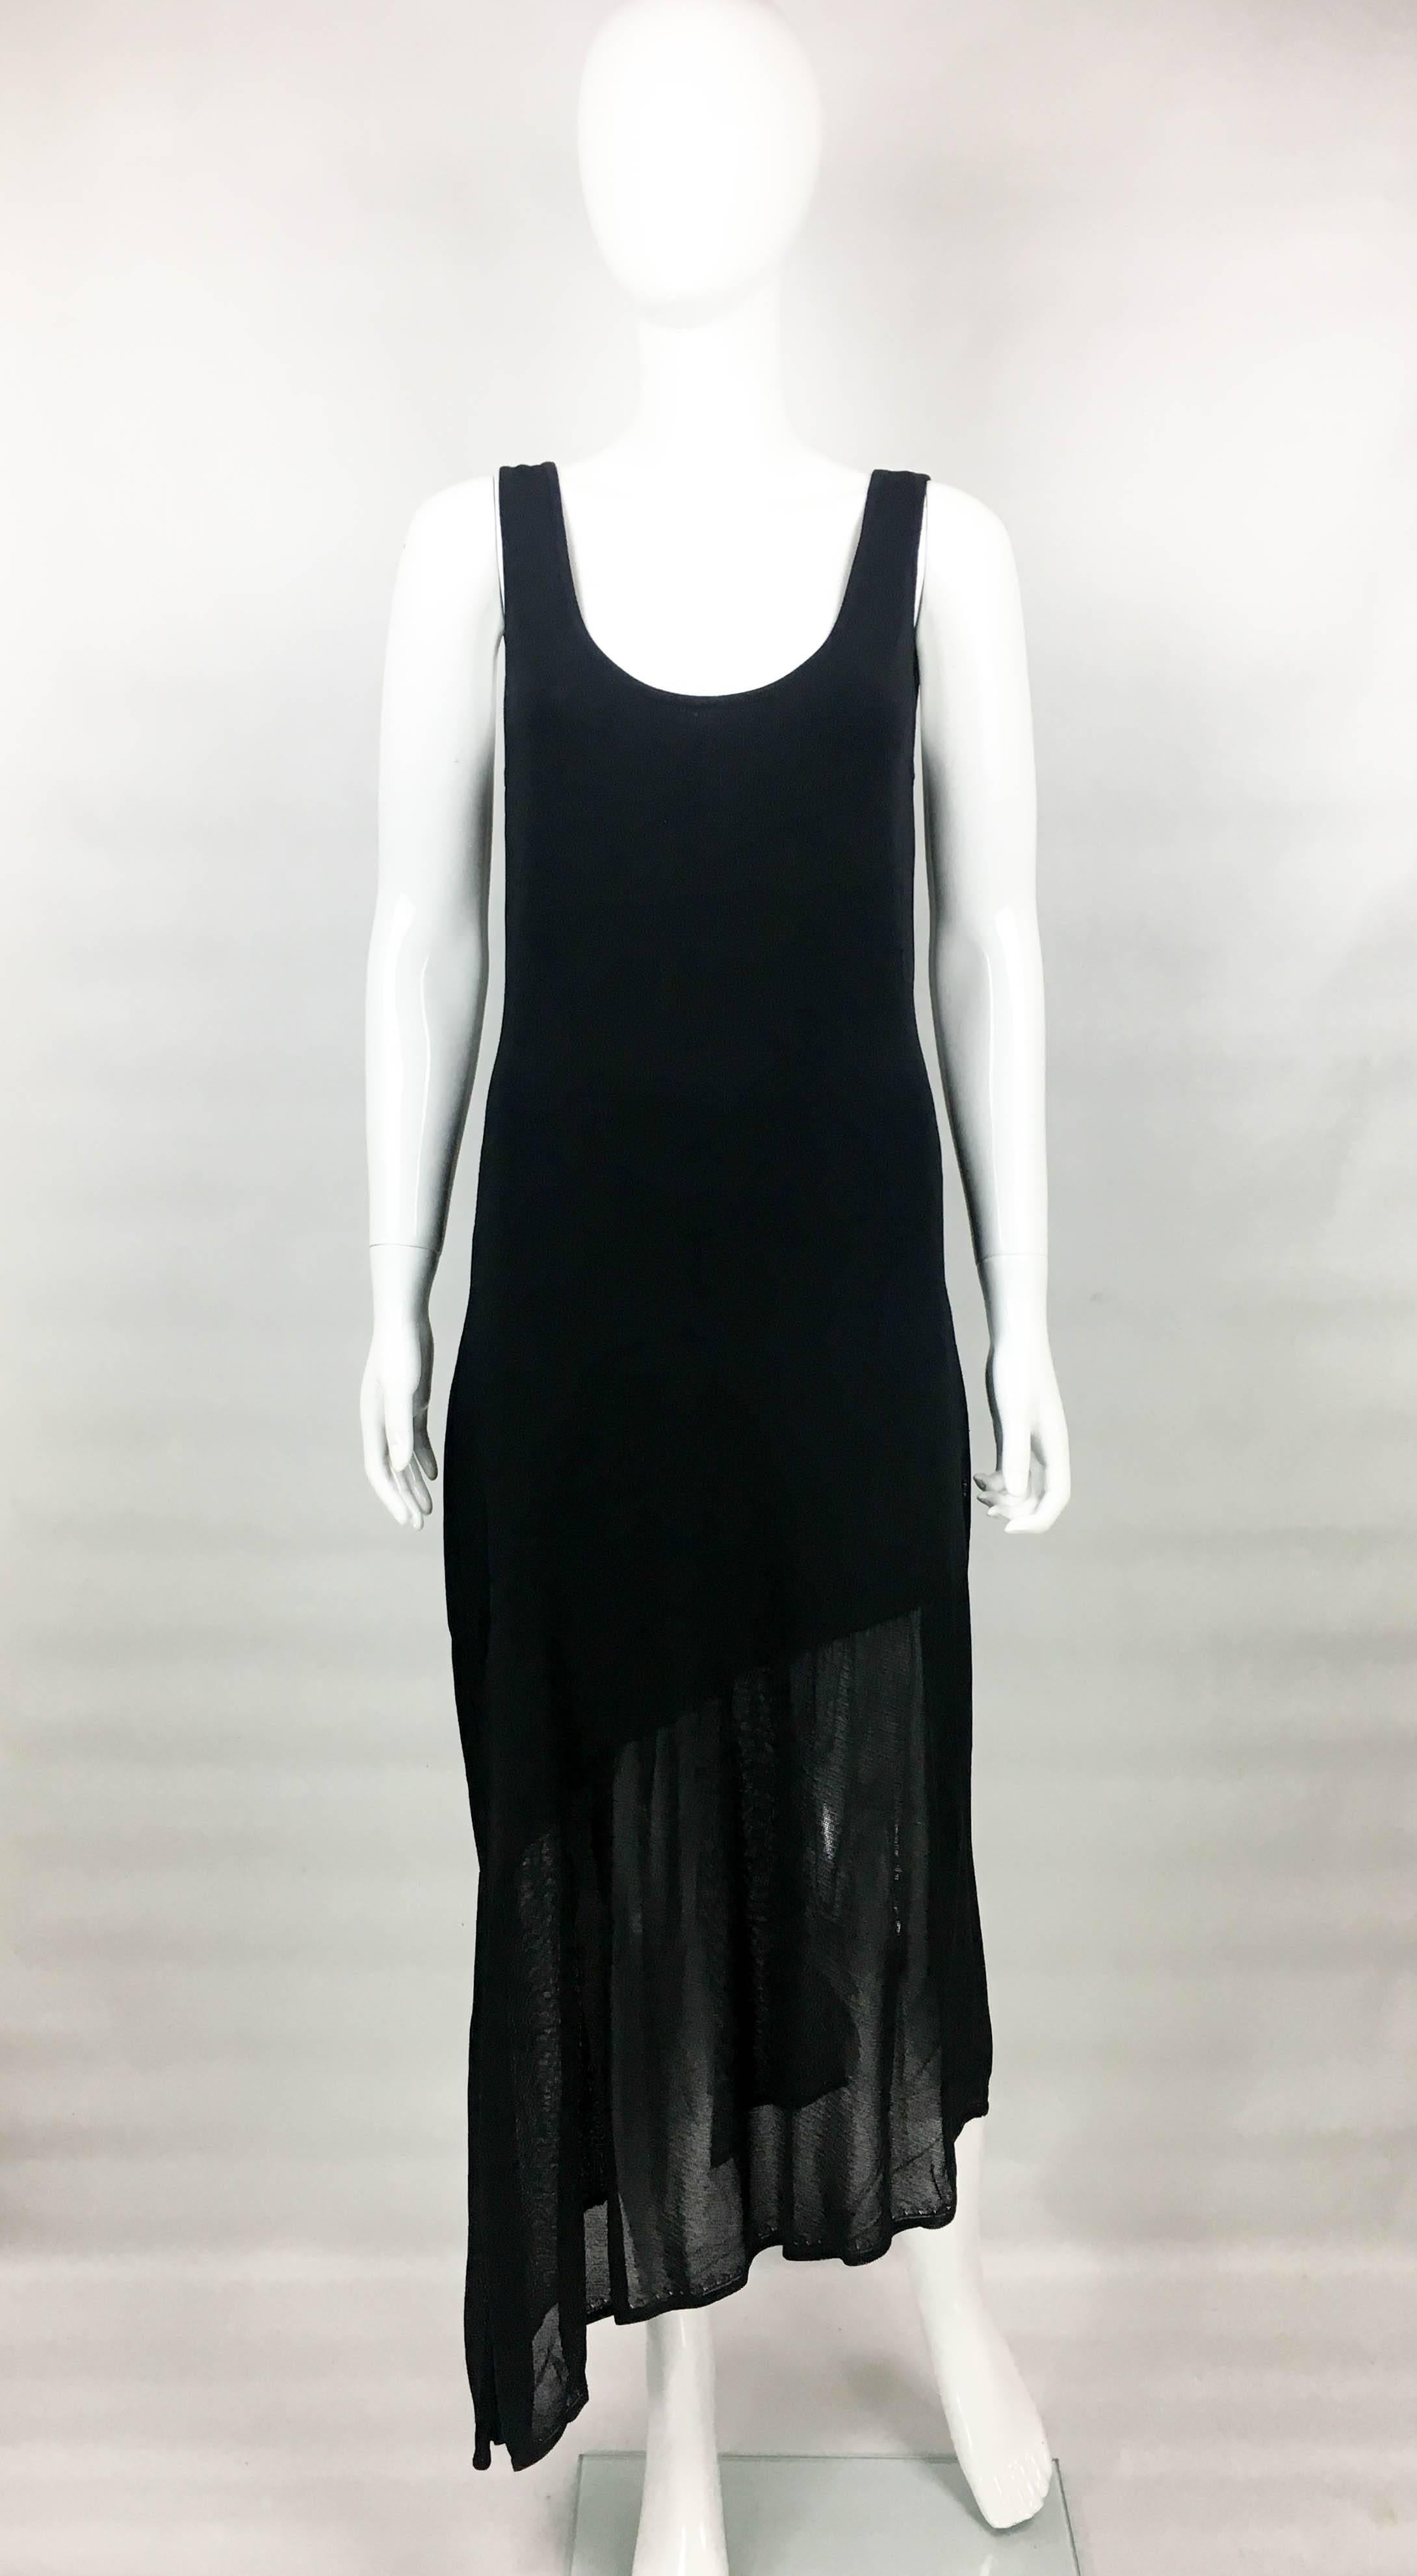 Chanel Asymmetrical Black Dress, 2002  In Excellent Condition For Sale In London, Chelsea